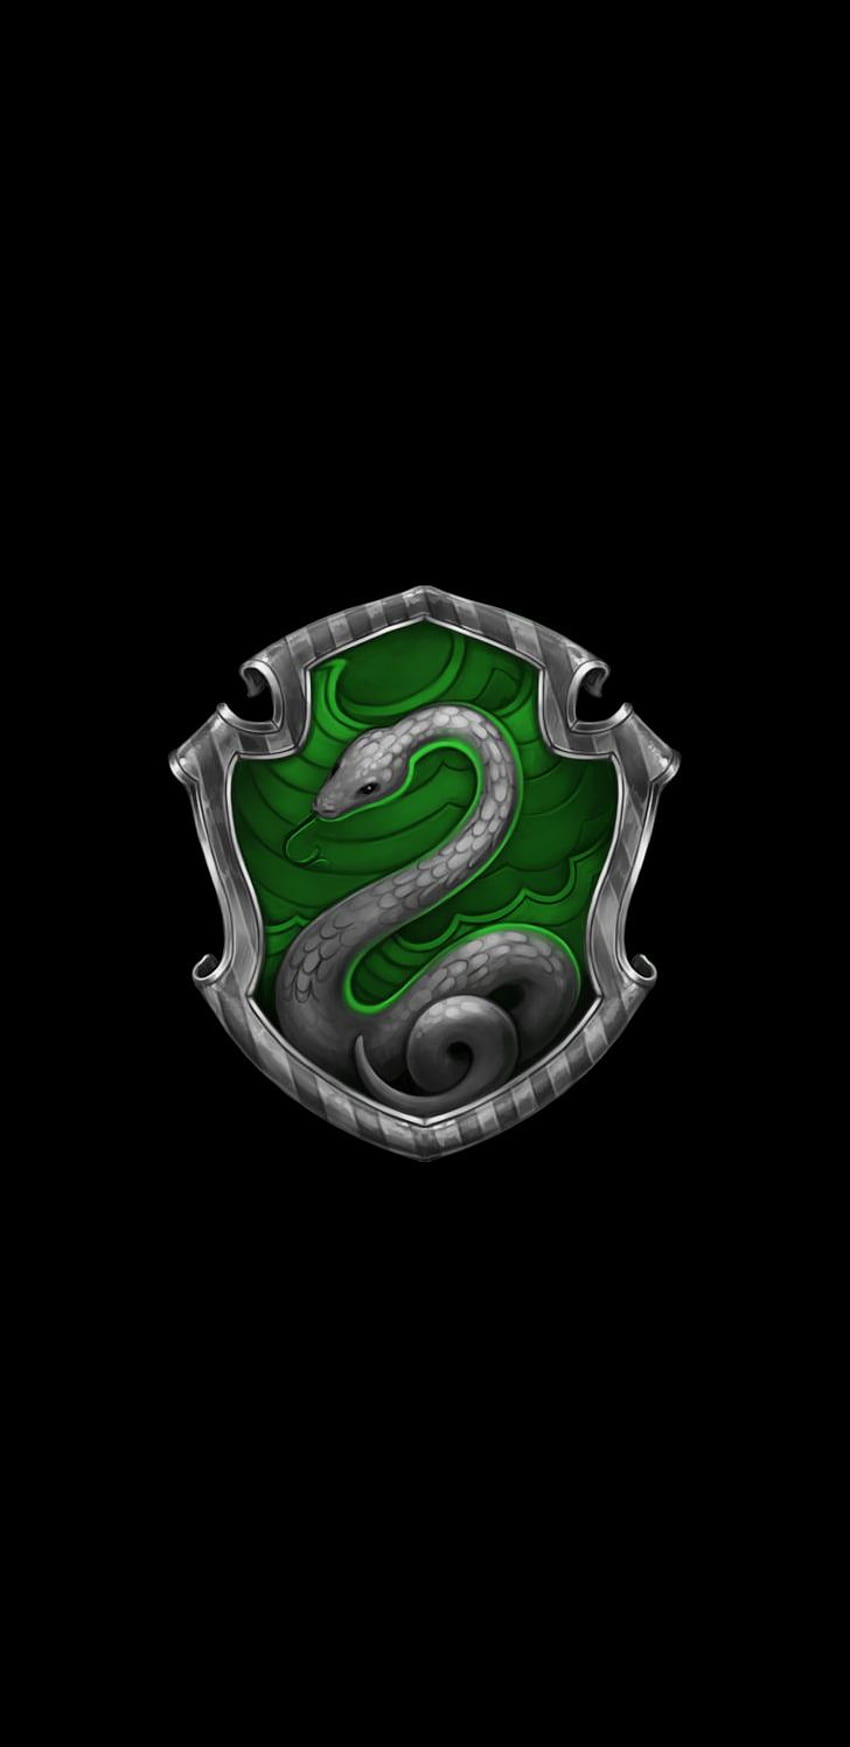 Ravenclaw & Slytherin house crest AMOLED for mobile phones [] HD phone wallpaper